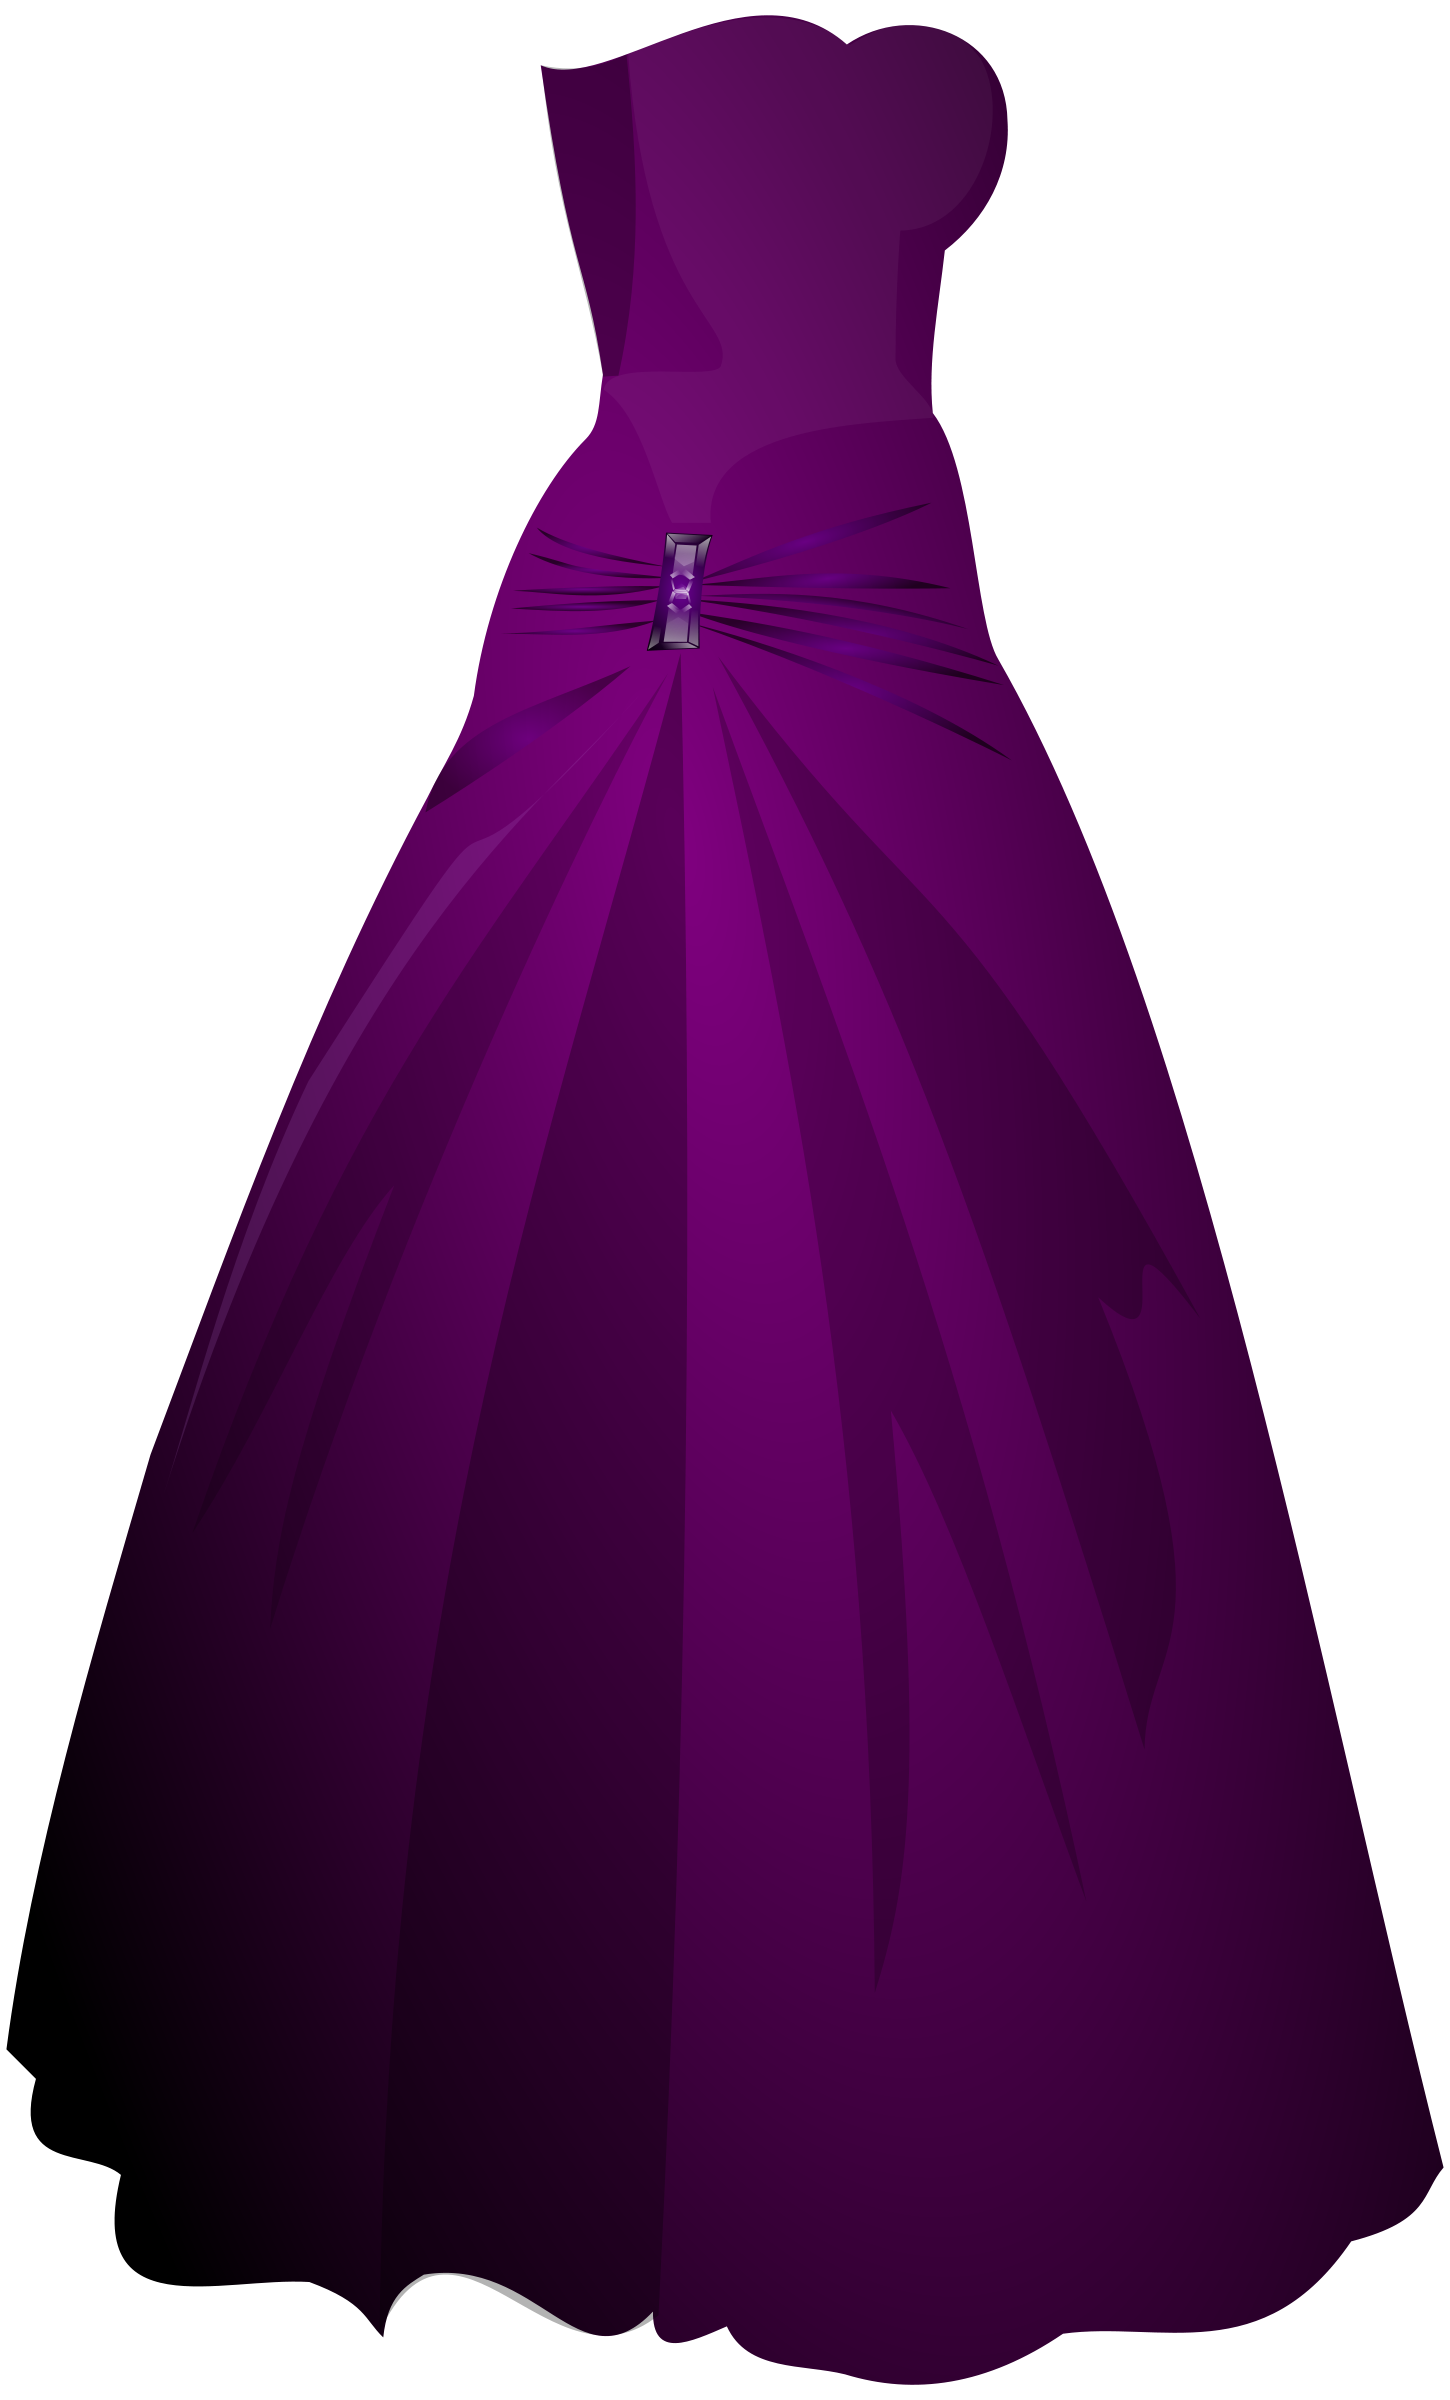 clipart of dress - photo #16